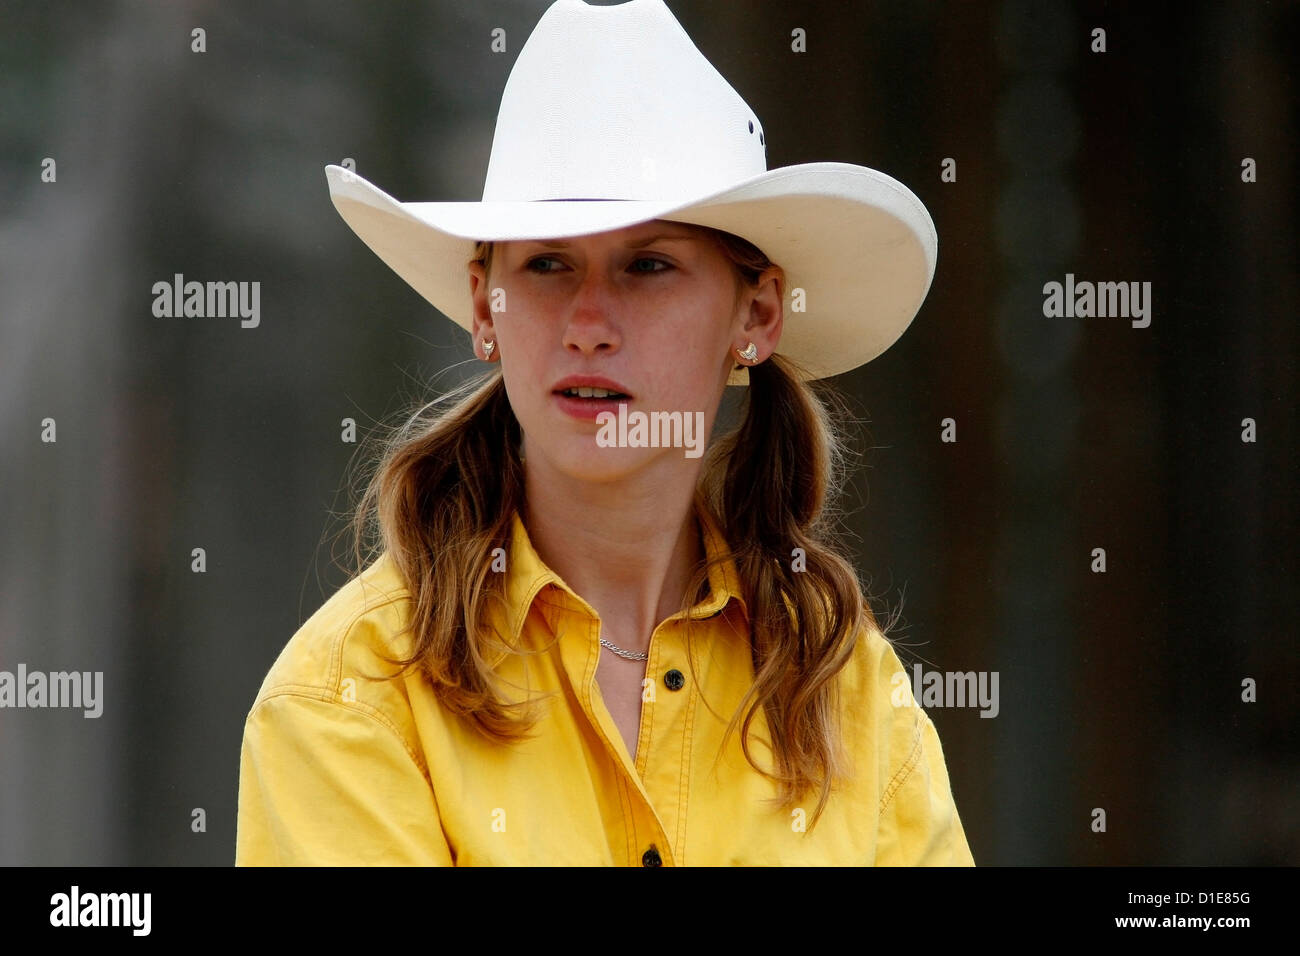 cowgirl in a yellow shirt and with hat Stock Photo